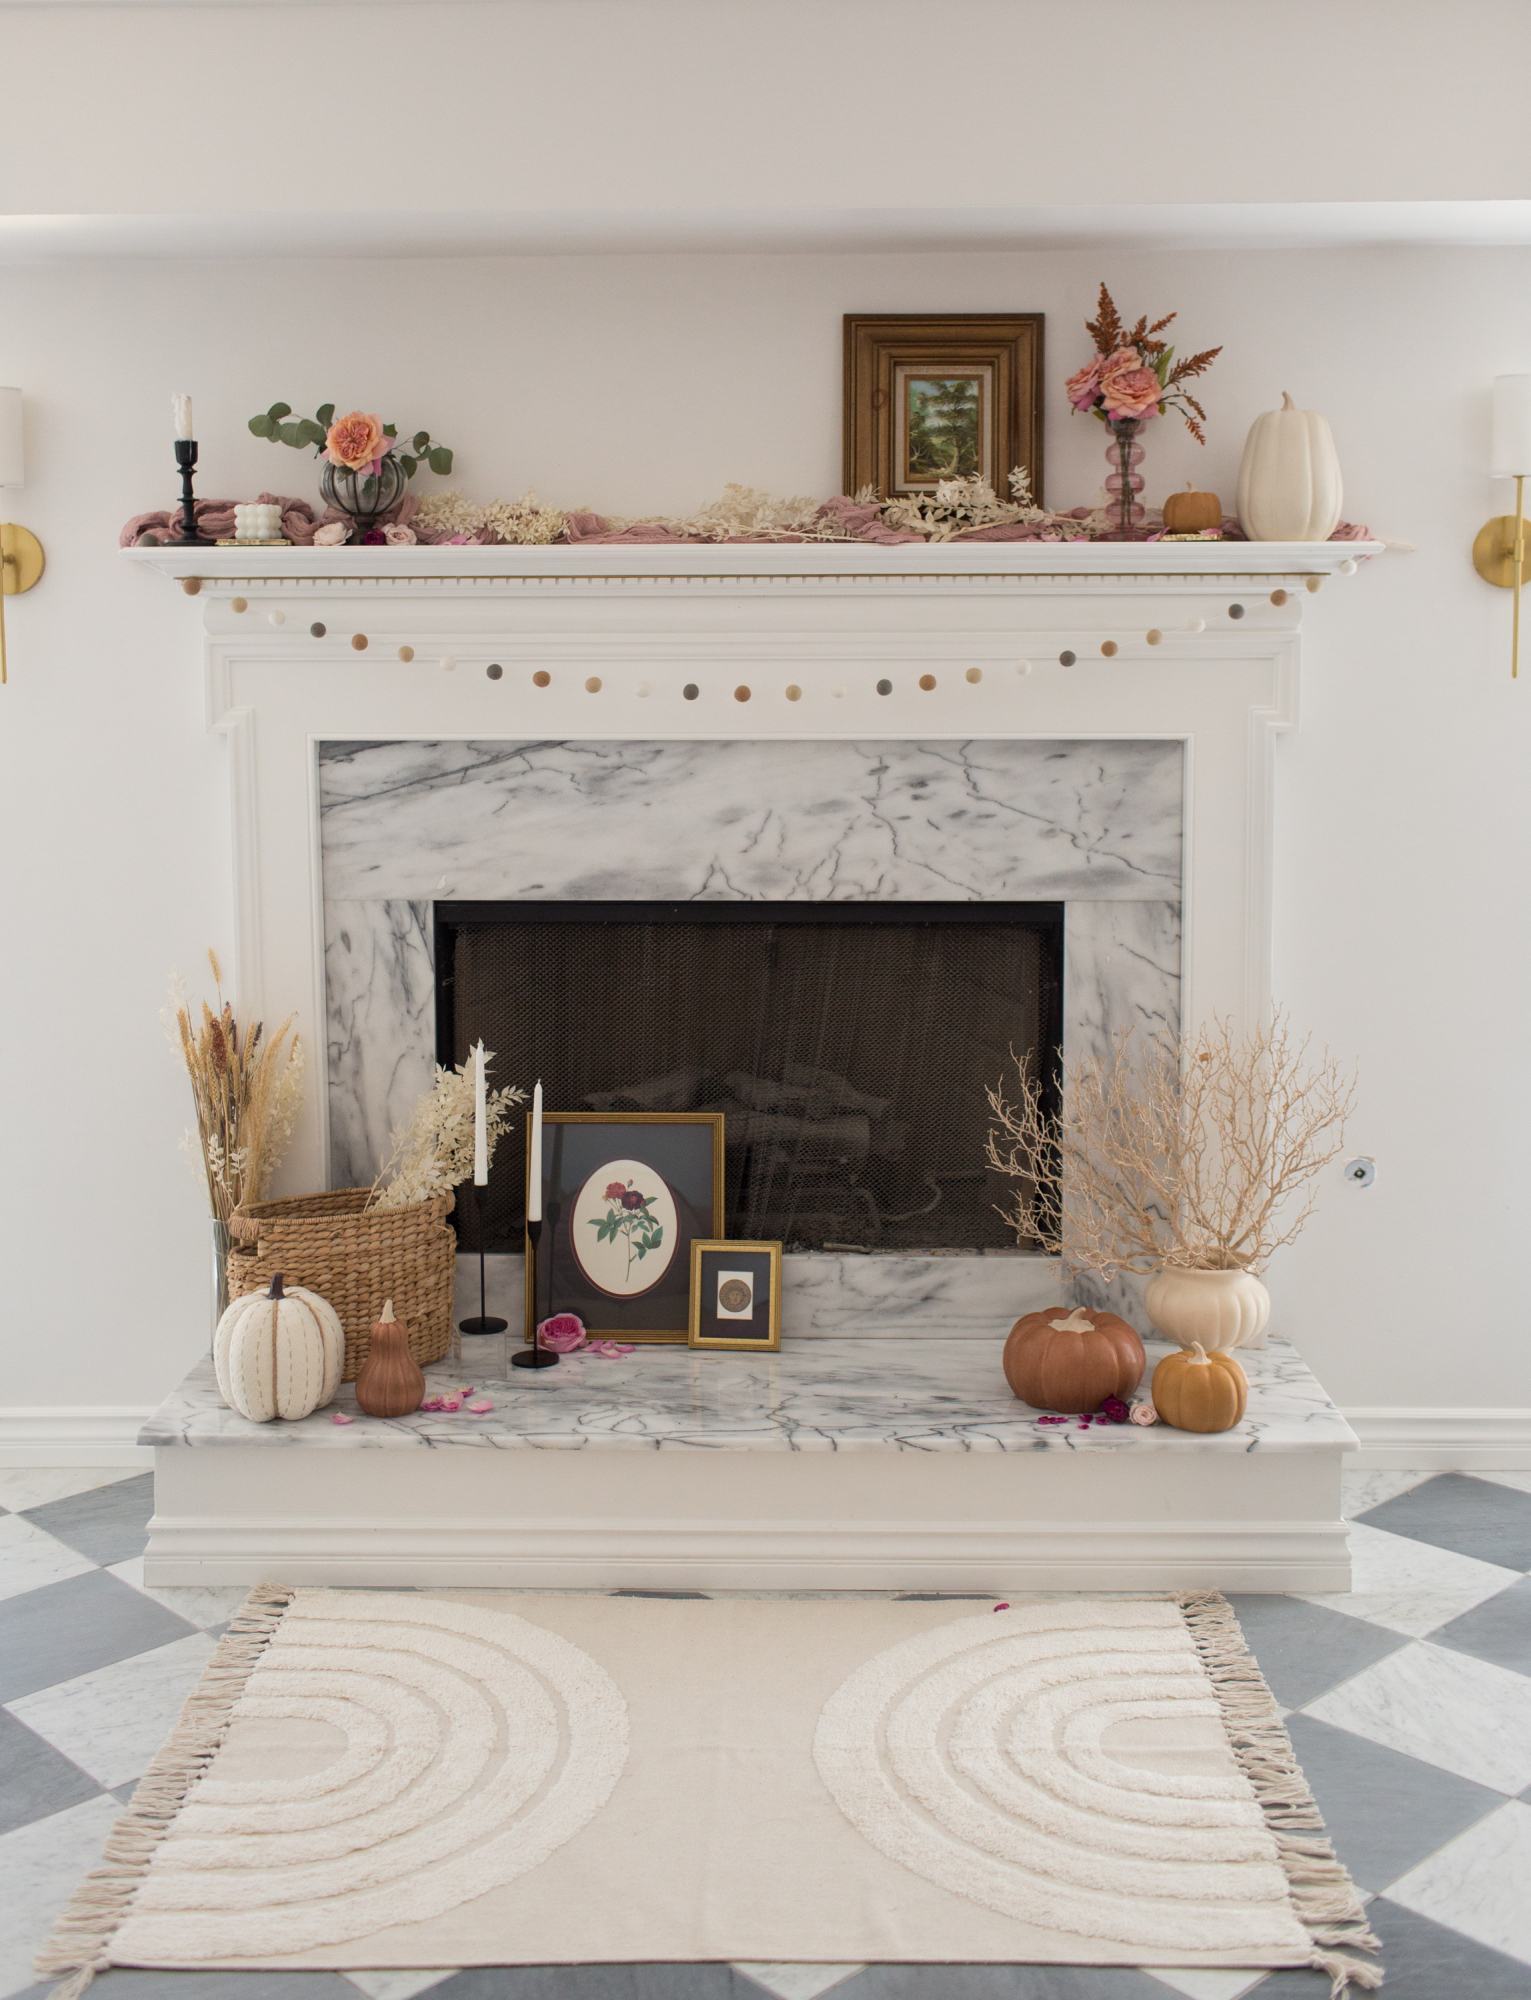 How to Style a Vintage Fall Mantel